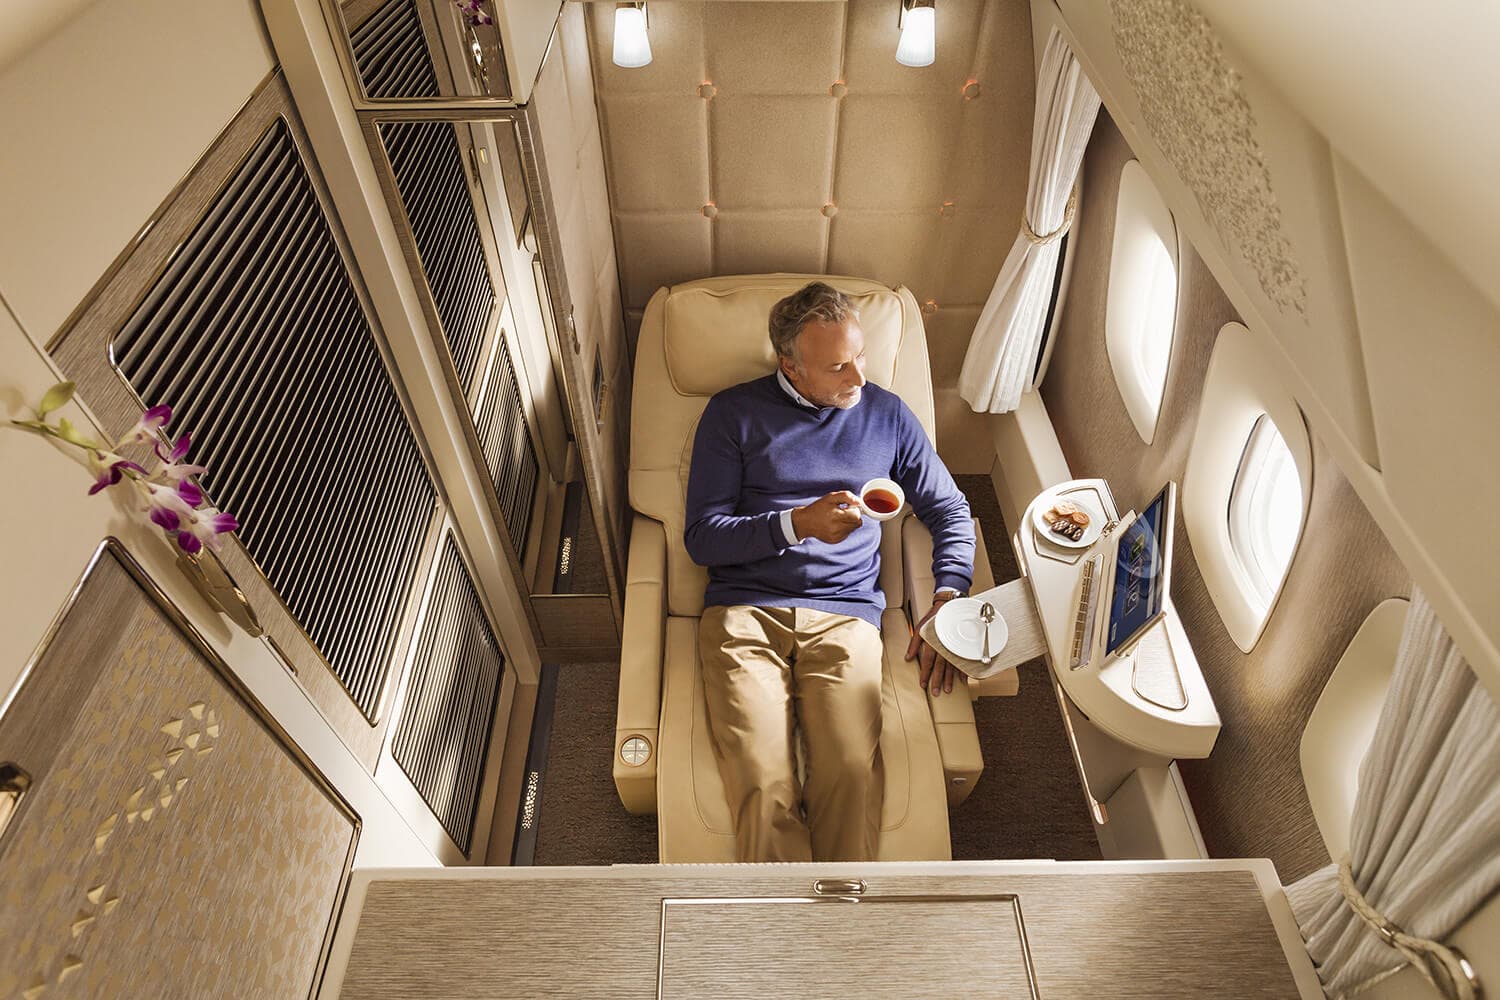 Emirates cream and gold First Class cabin suite interior with man seated drinking tea